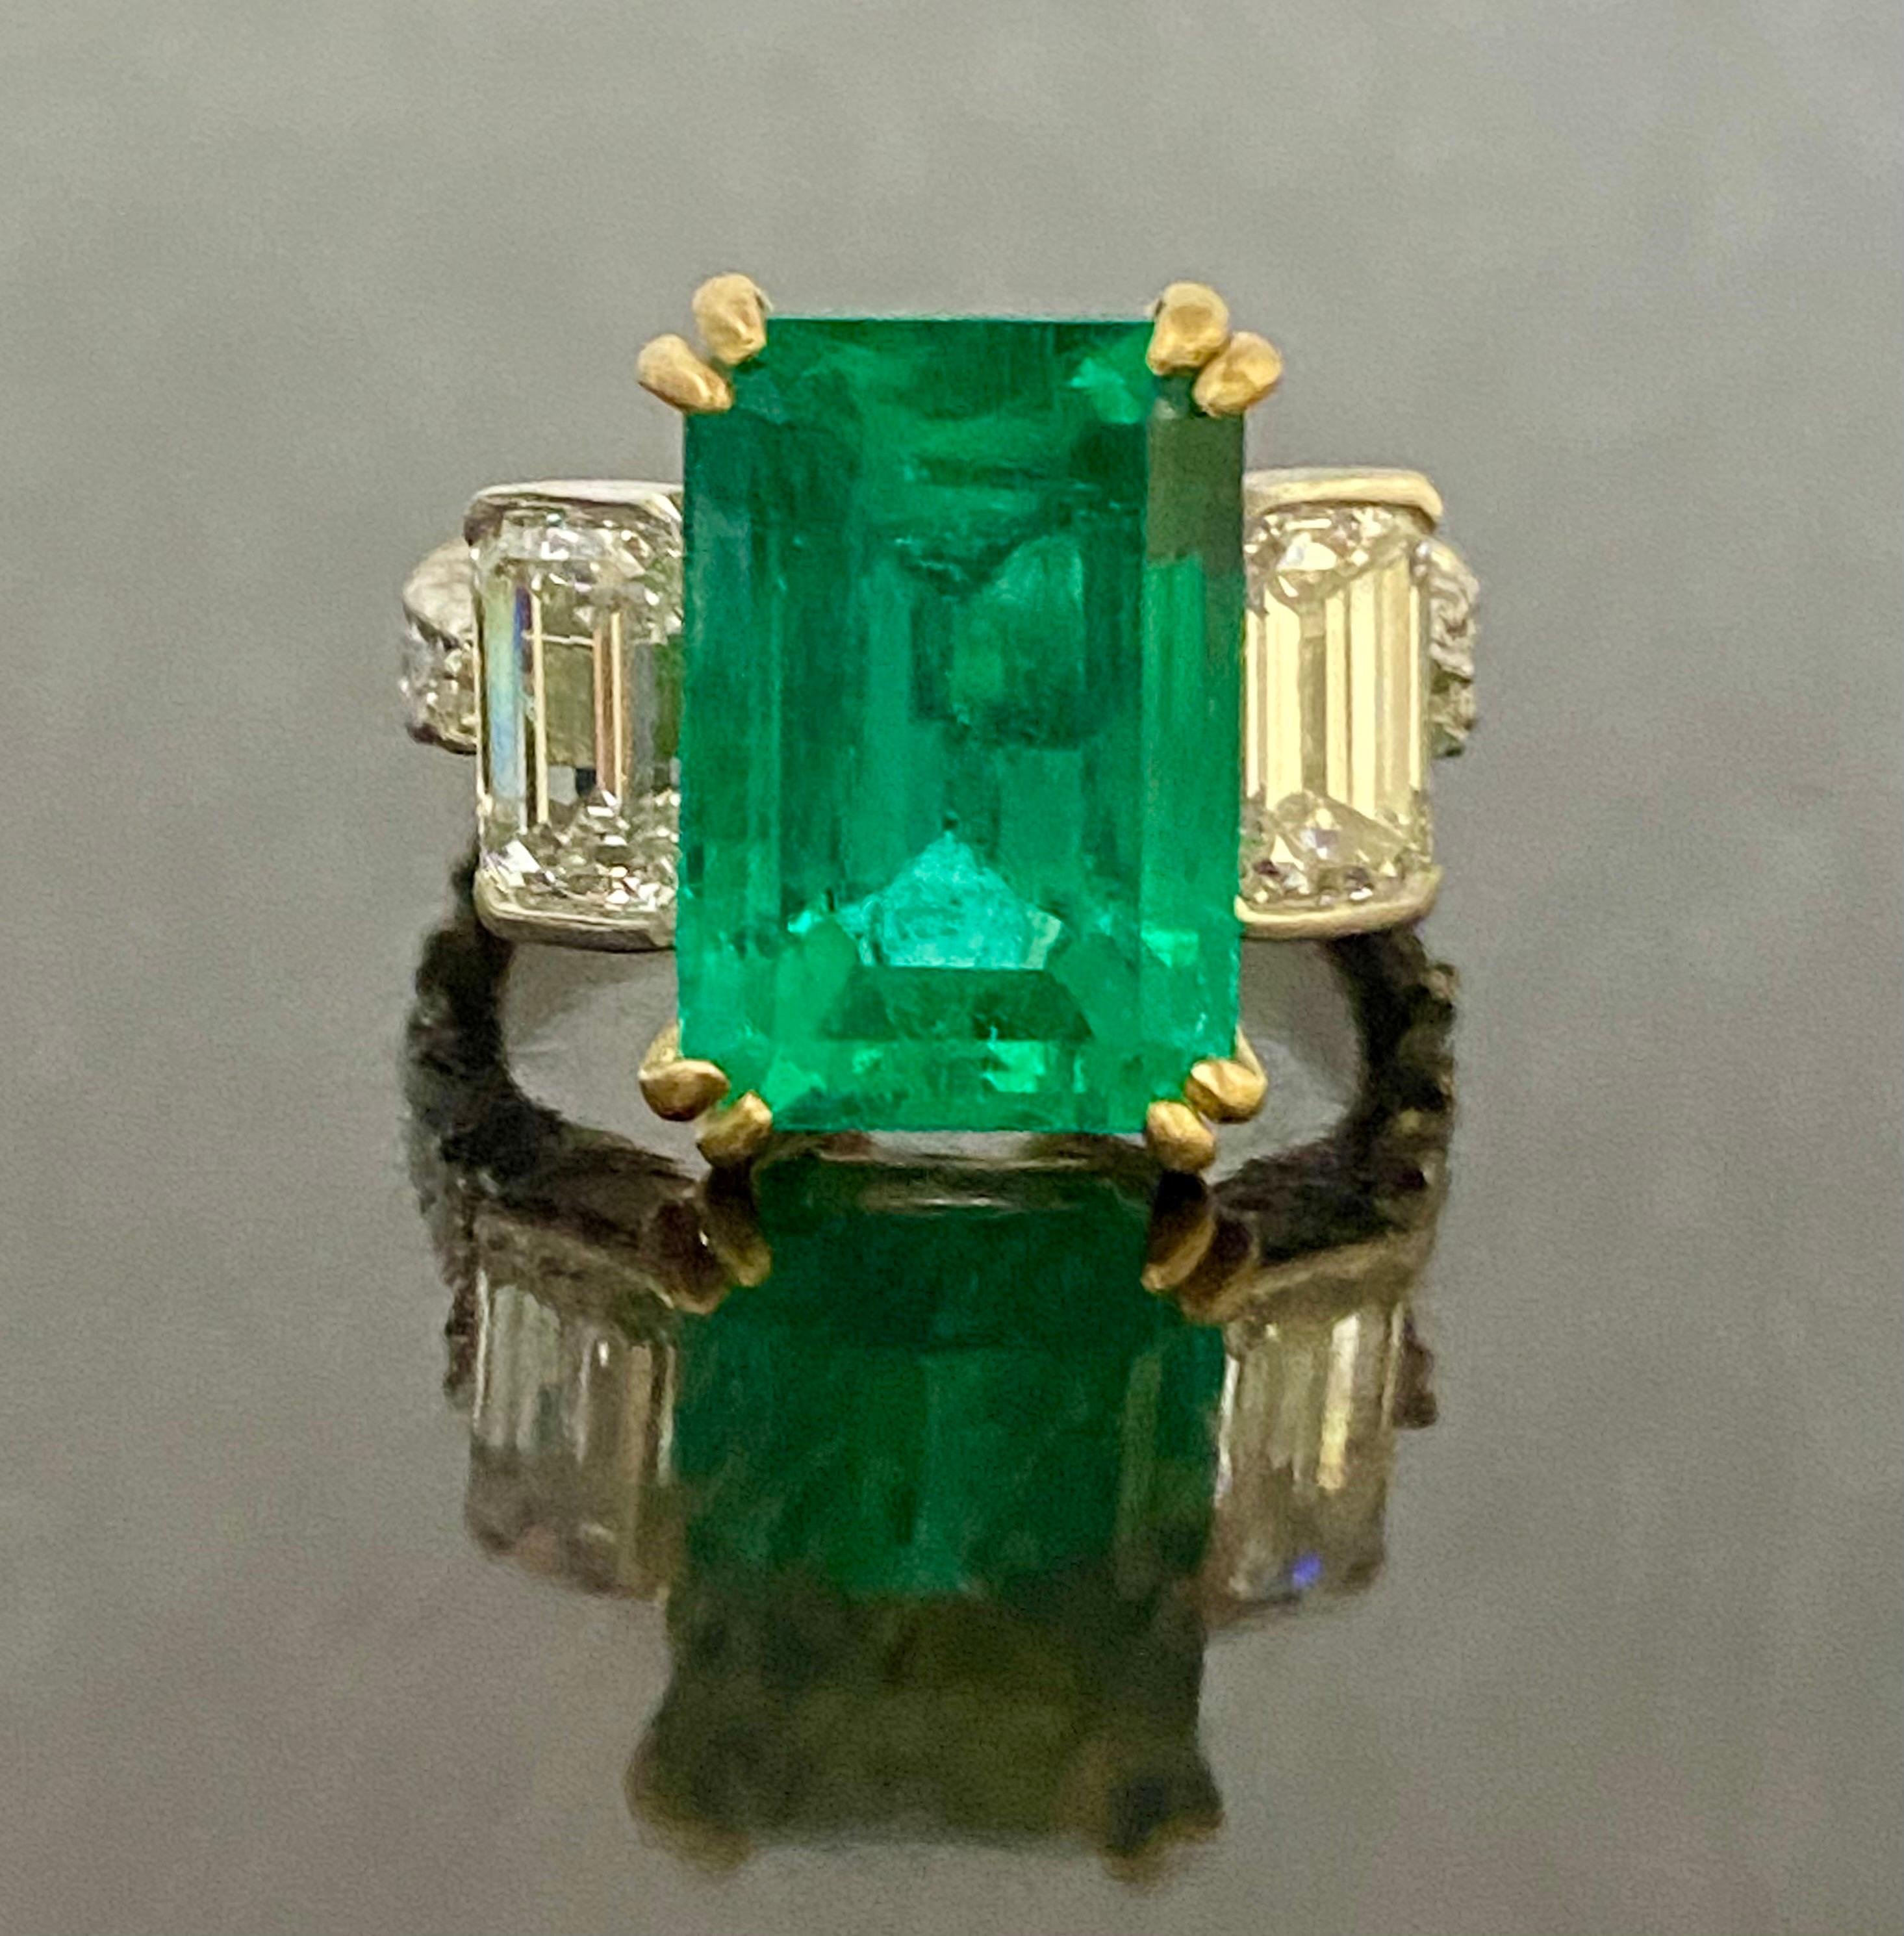 Platinum French Pave Emerald Cut Diamond 6.78 Carat GIA Colombian Emerald Ring For Sale 3